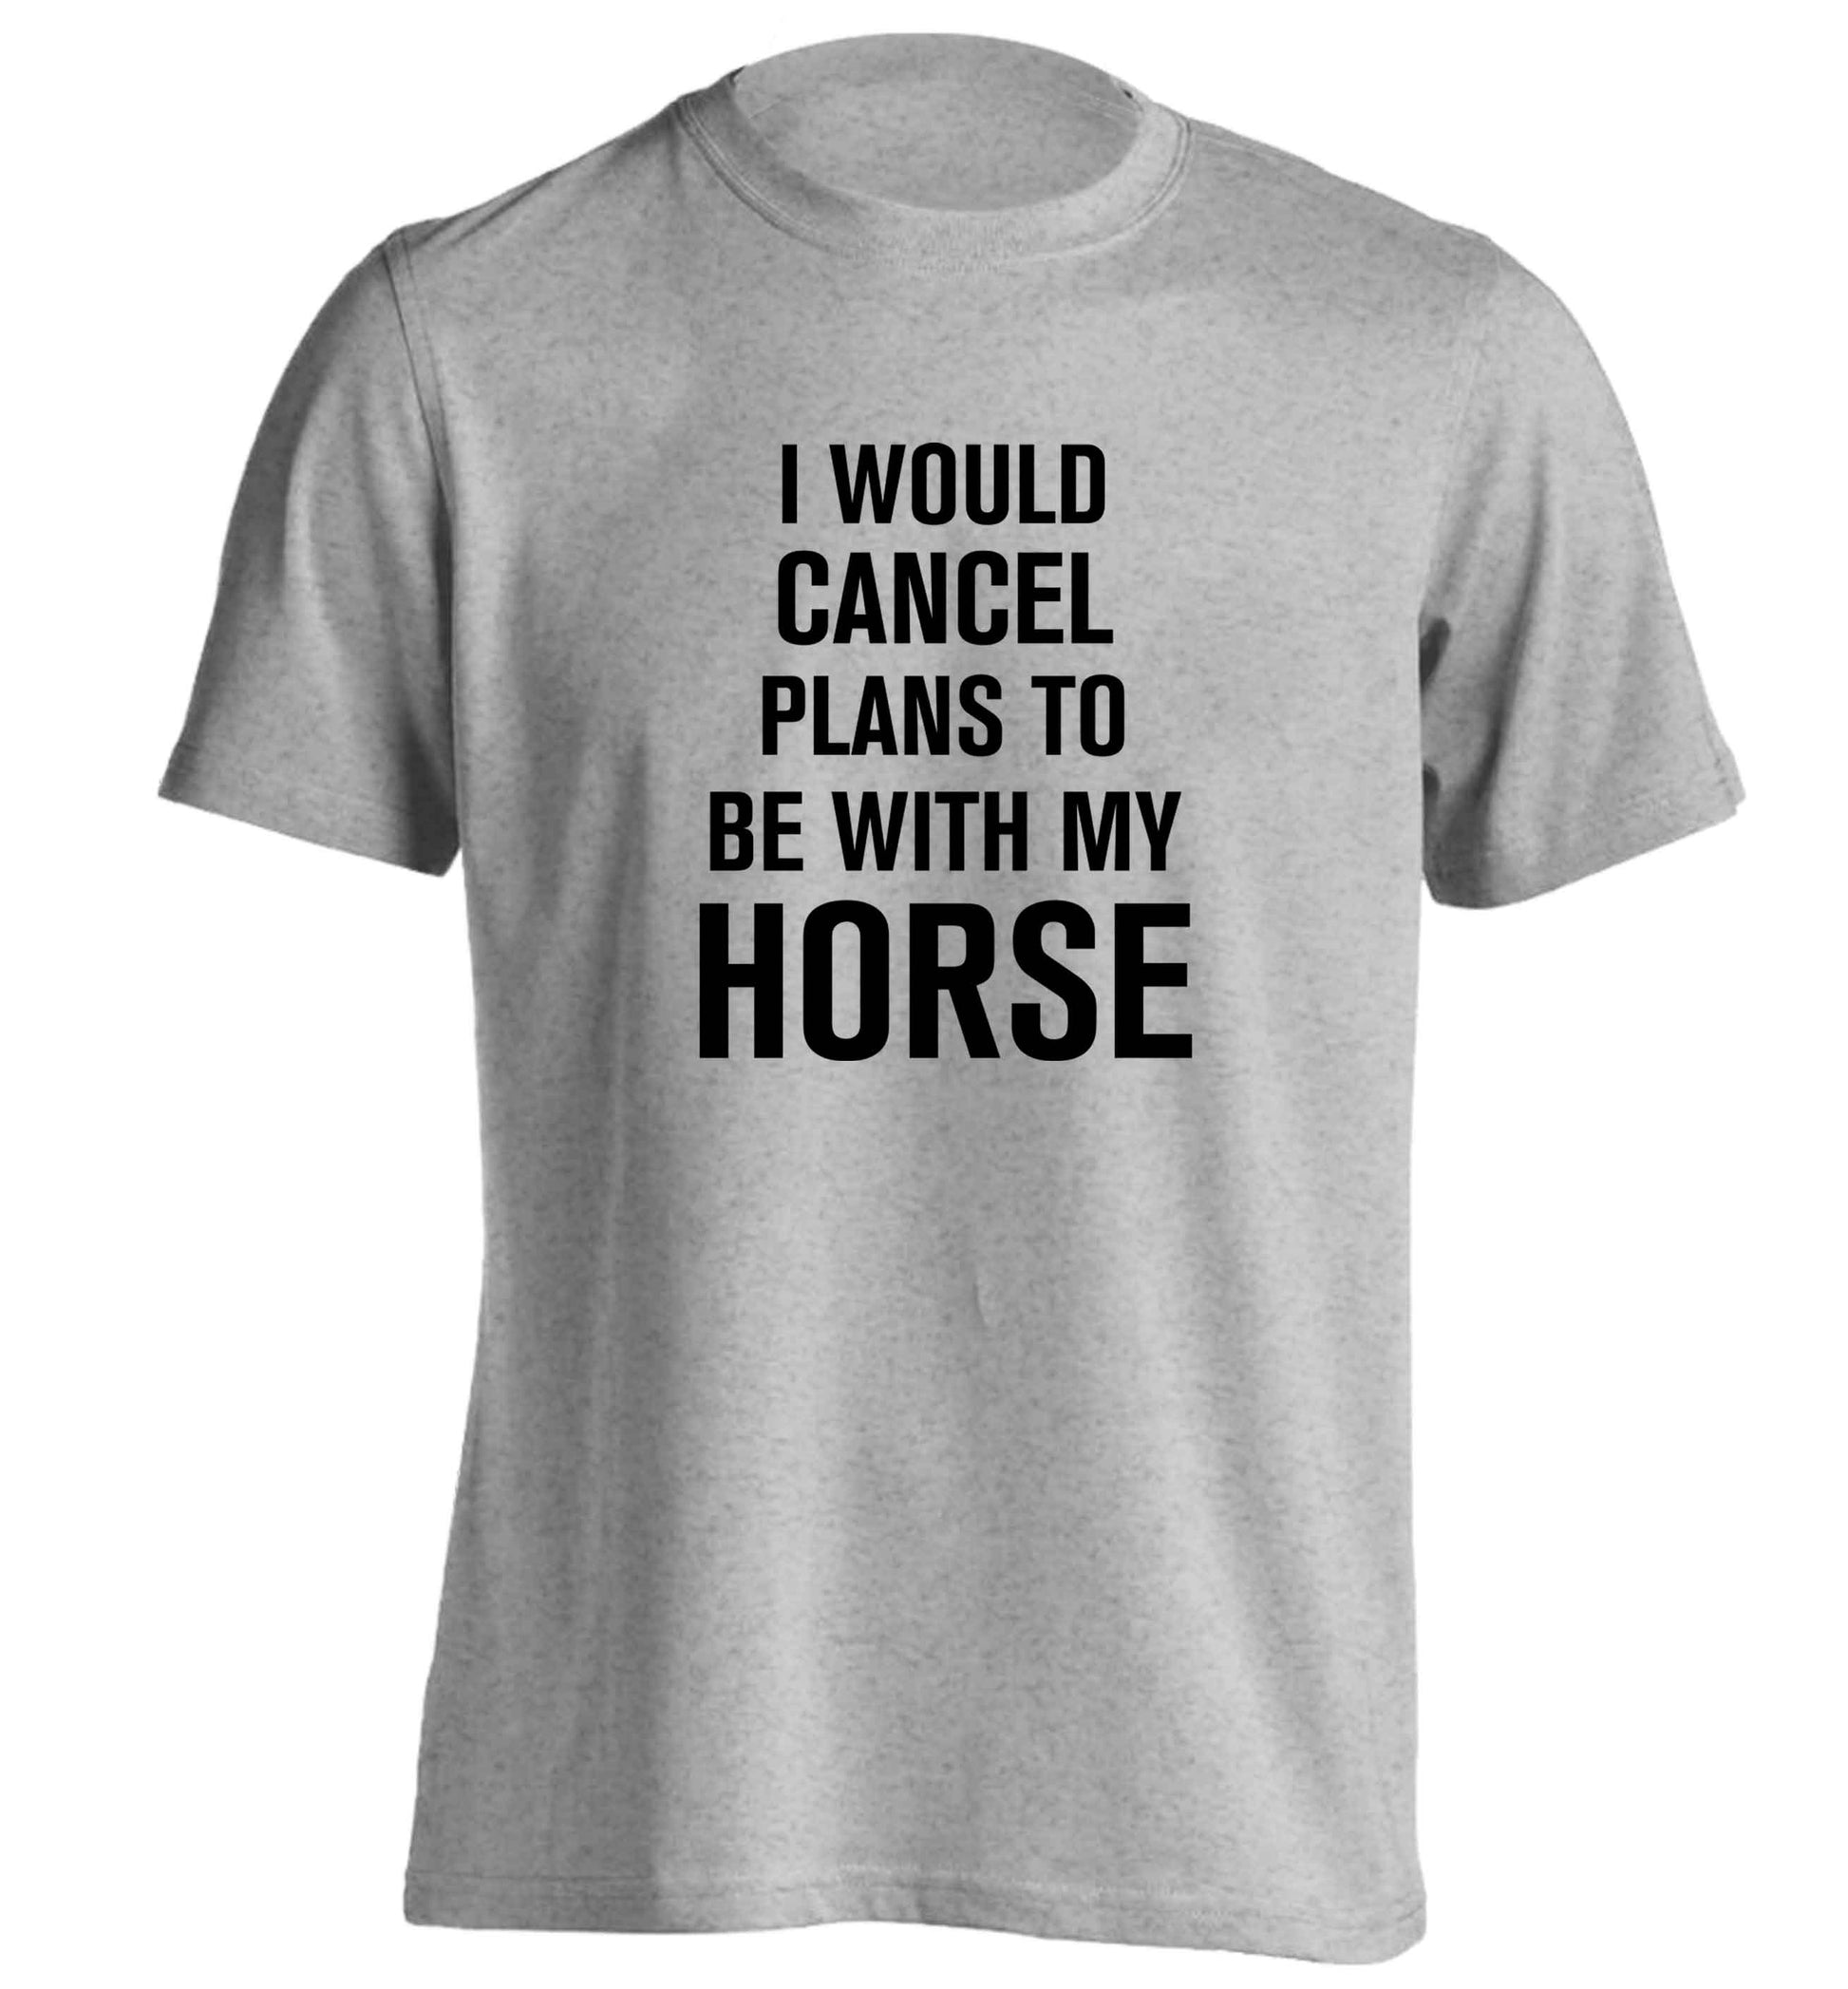 I will cancel plans to be with my horse adults unisex grey Tshirt 2XL